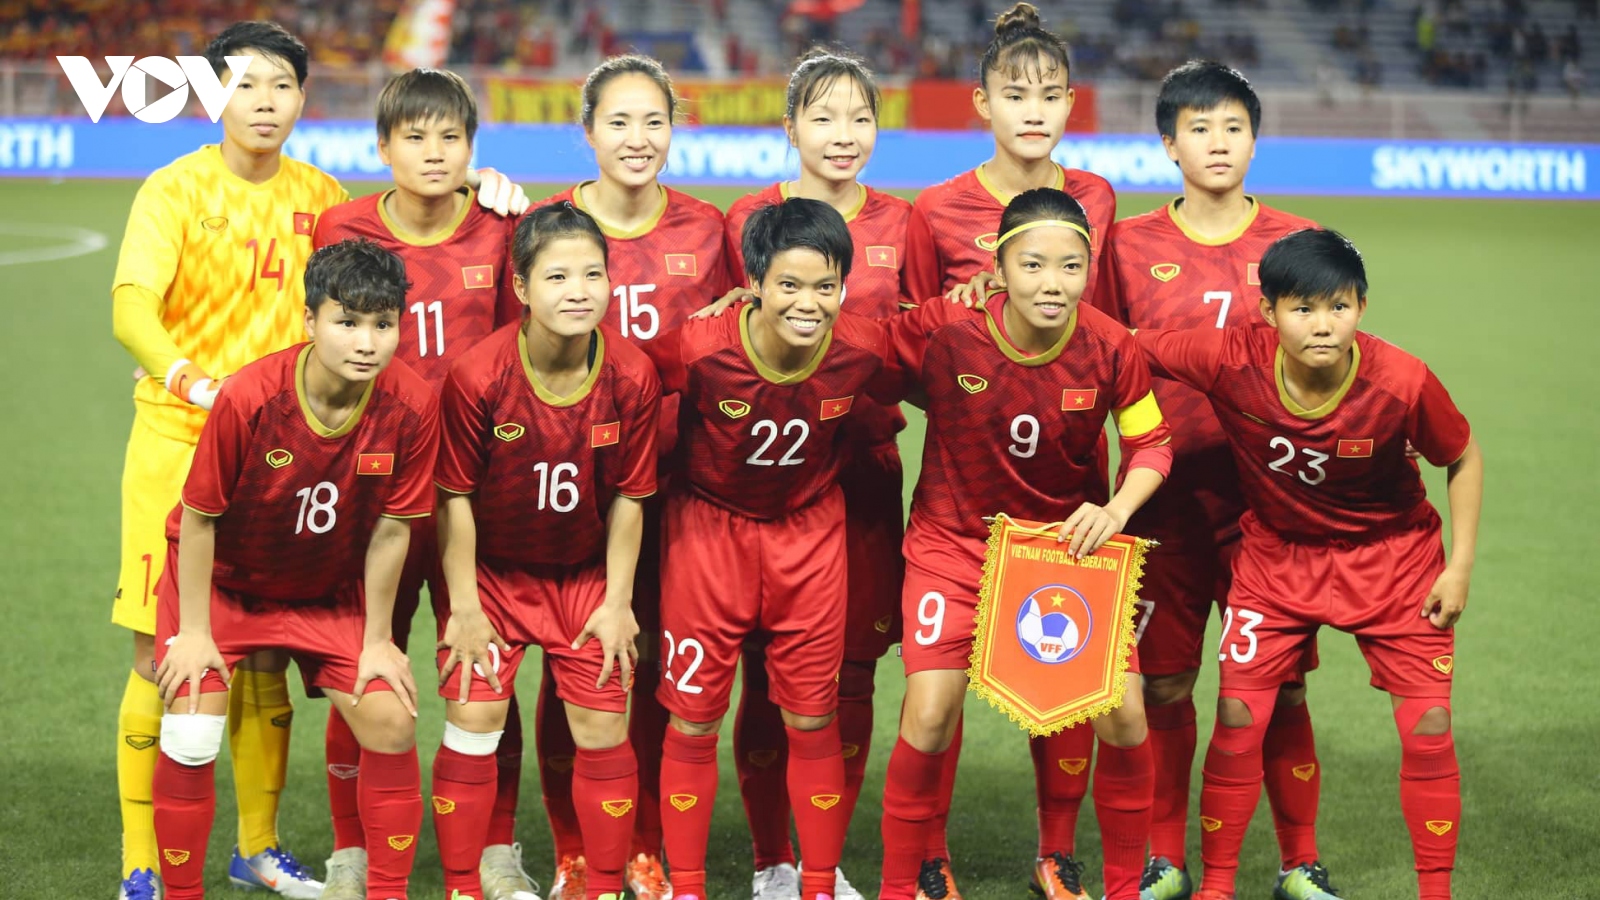 Vietnam women’s team handed World Cup opportunity after DPRK withdrawal